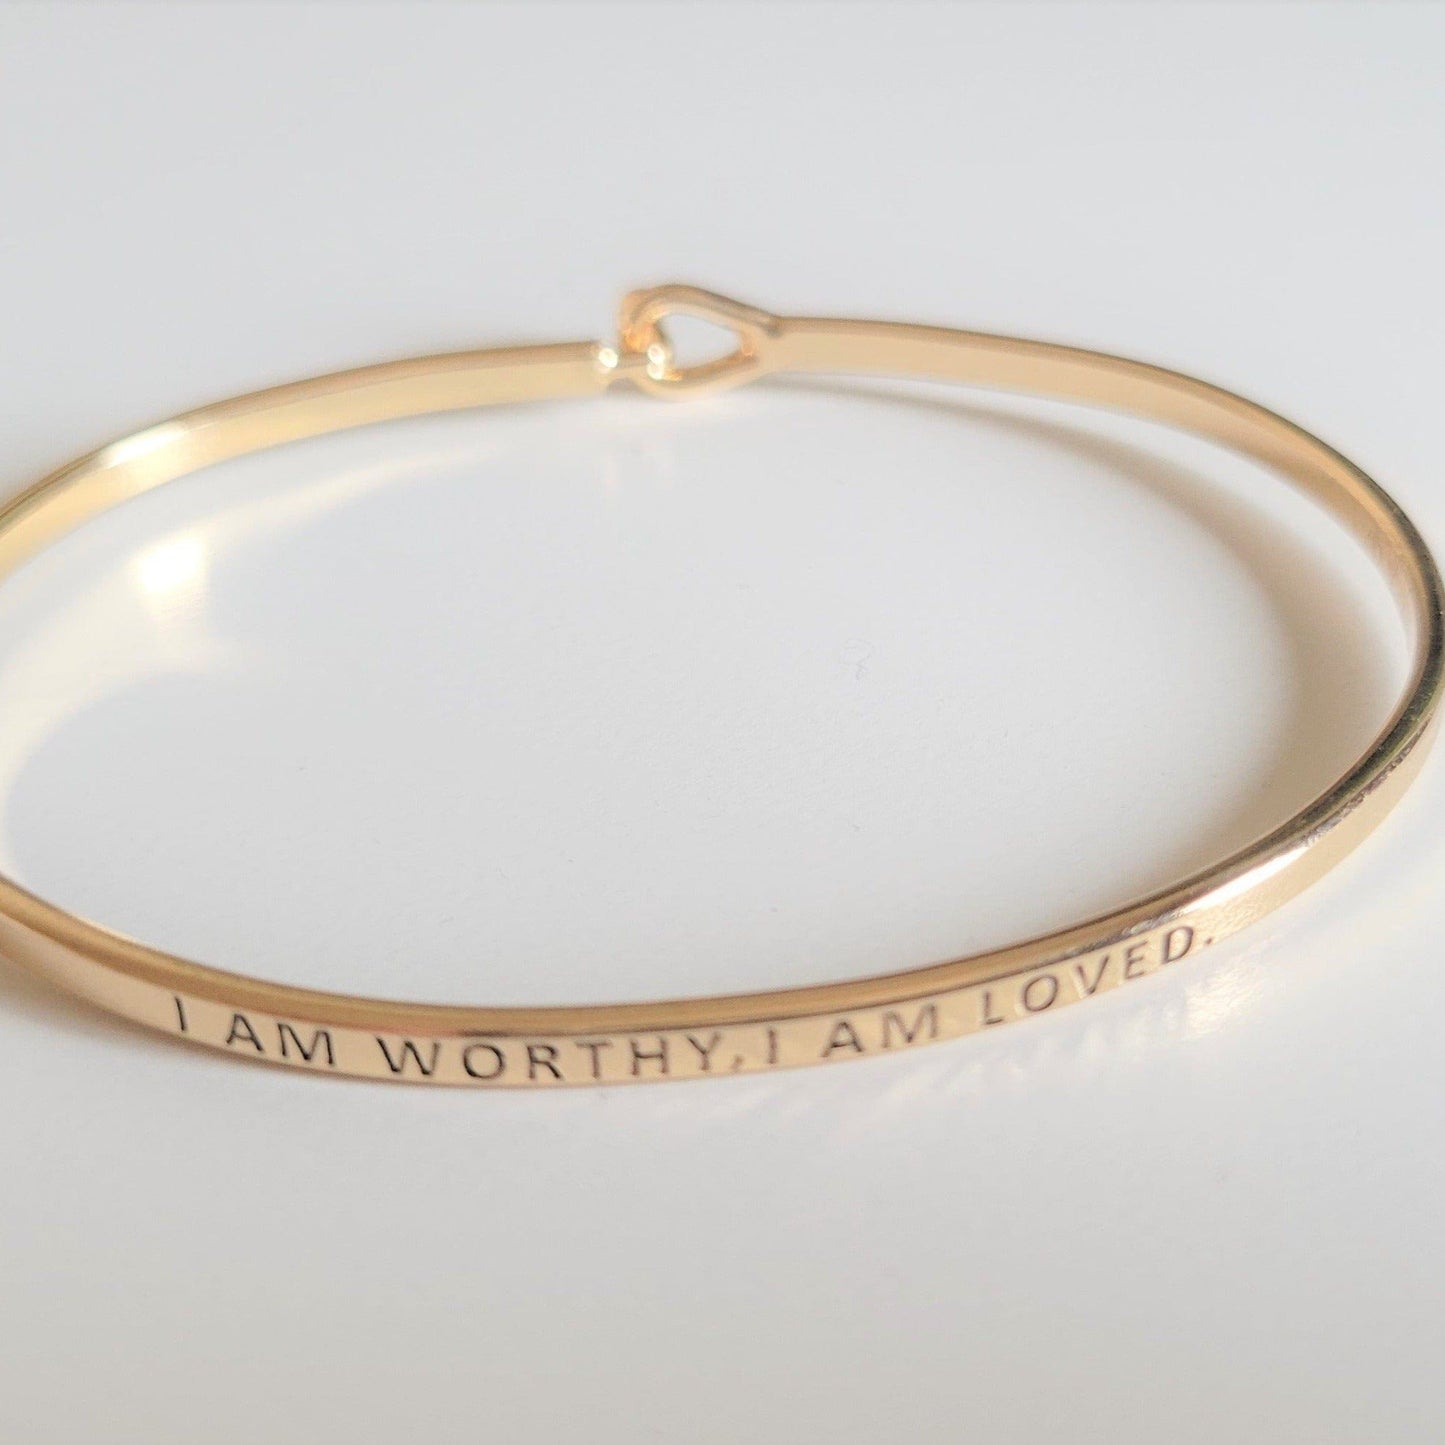 "I Am Worthy, I Am Loved" Bracelet By Recovery Matters Gold